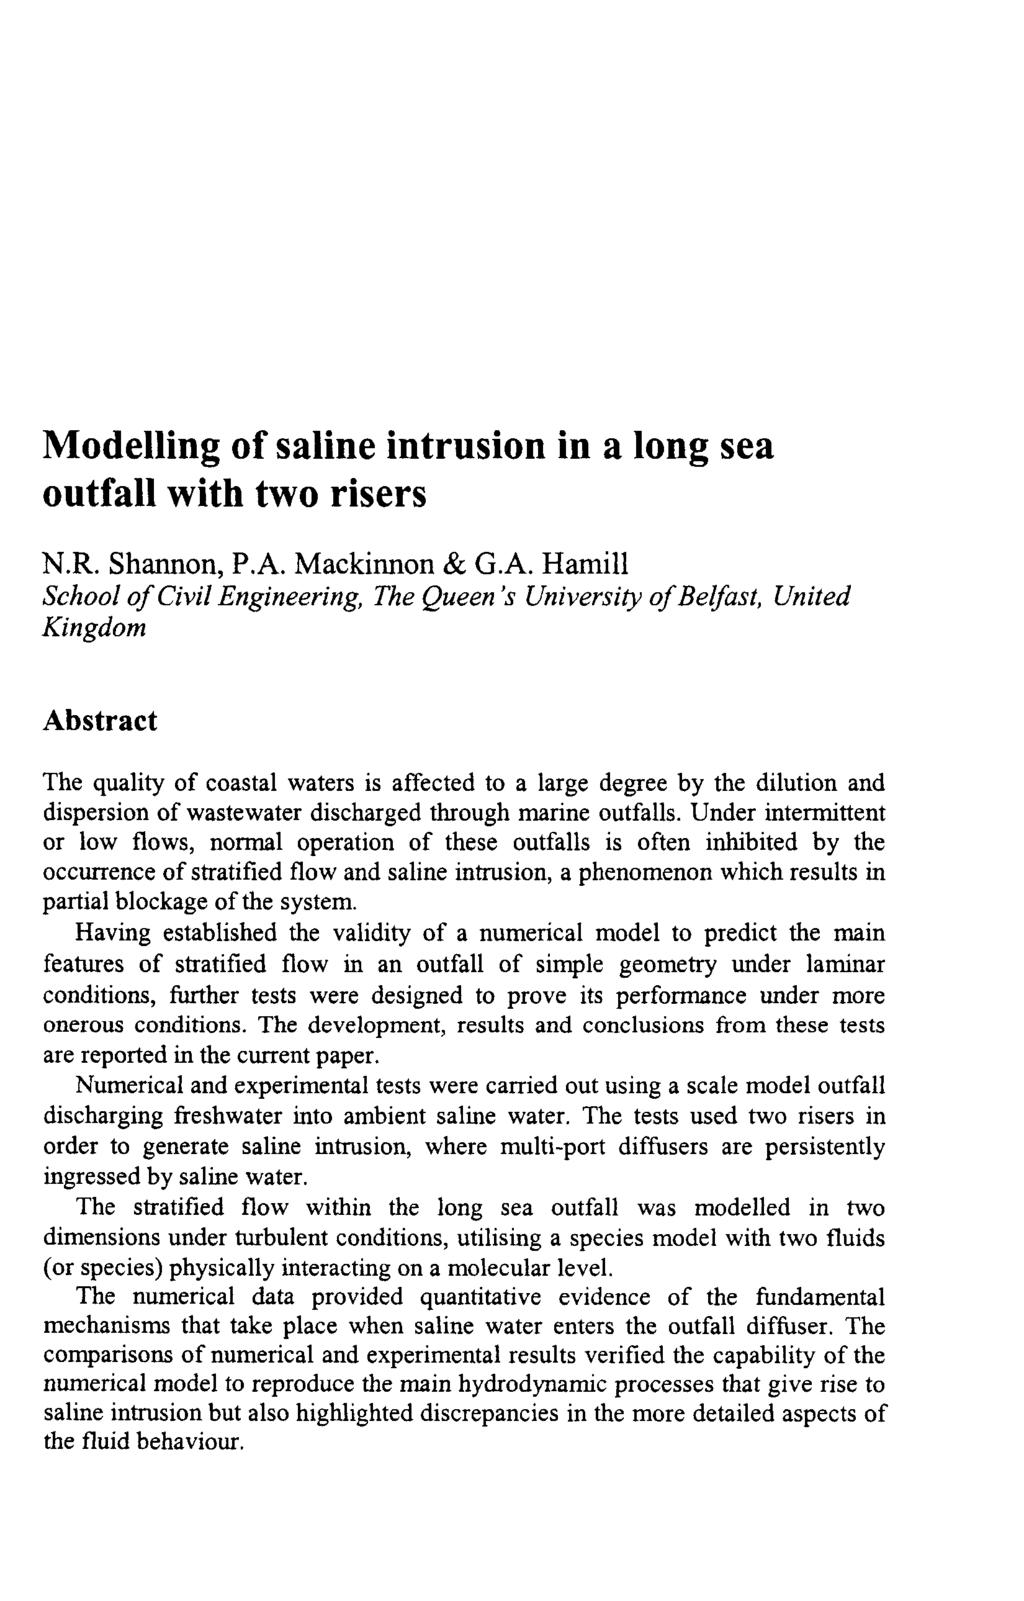 Modelling of saline intrusion in a long sea outfall with two risers N.R. Shannon, P.A.